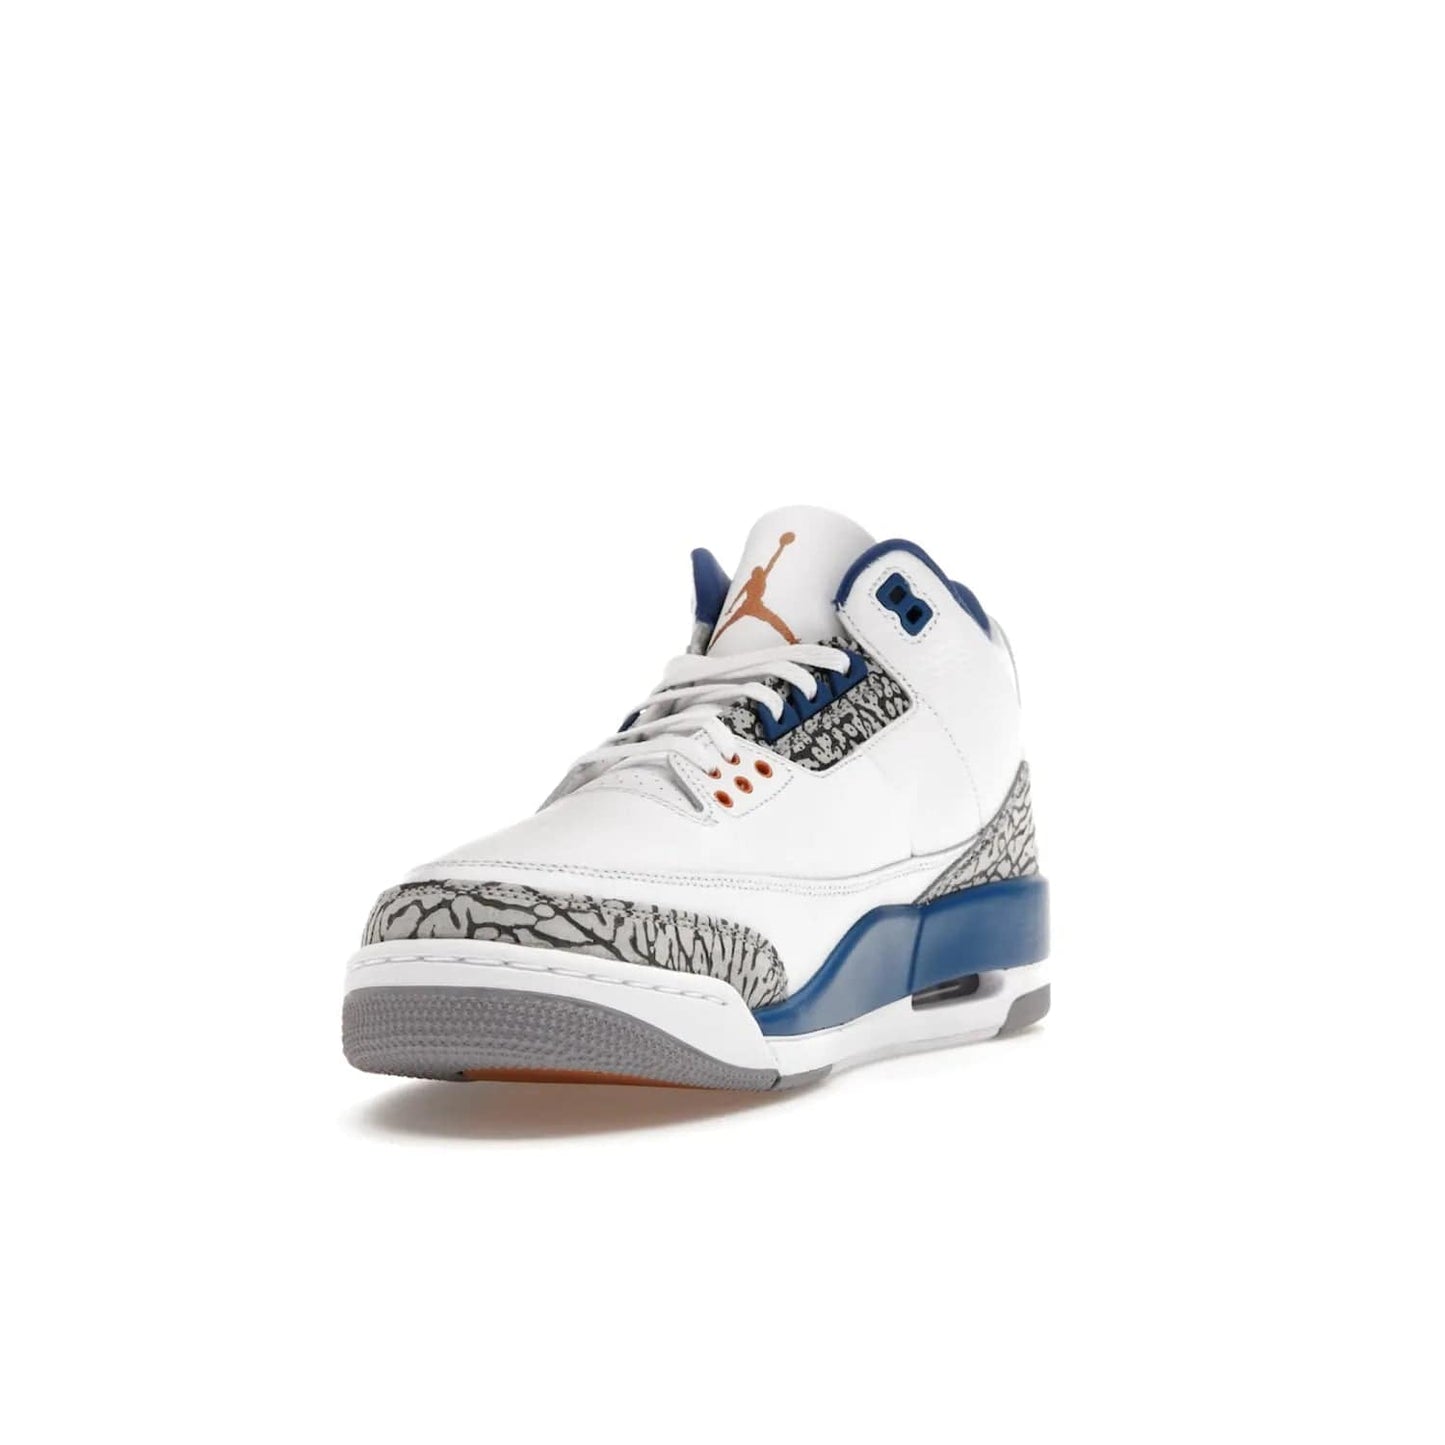 Jordan 3 Retro Wizards - Image 13 - Only at www.BallersClubKickz.com - ##
Special tribute sneaker from Jordan Brand to Michael Jordan's time with the Washington Wizards. Iconic white upper, orange Jumpman logo, blue accents, metallic copper details, and cement grey outsole. Buy the Air Jordan 3 Retro Wizards April 29, 2023.